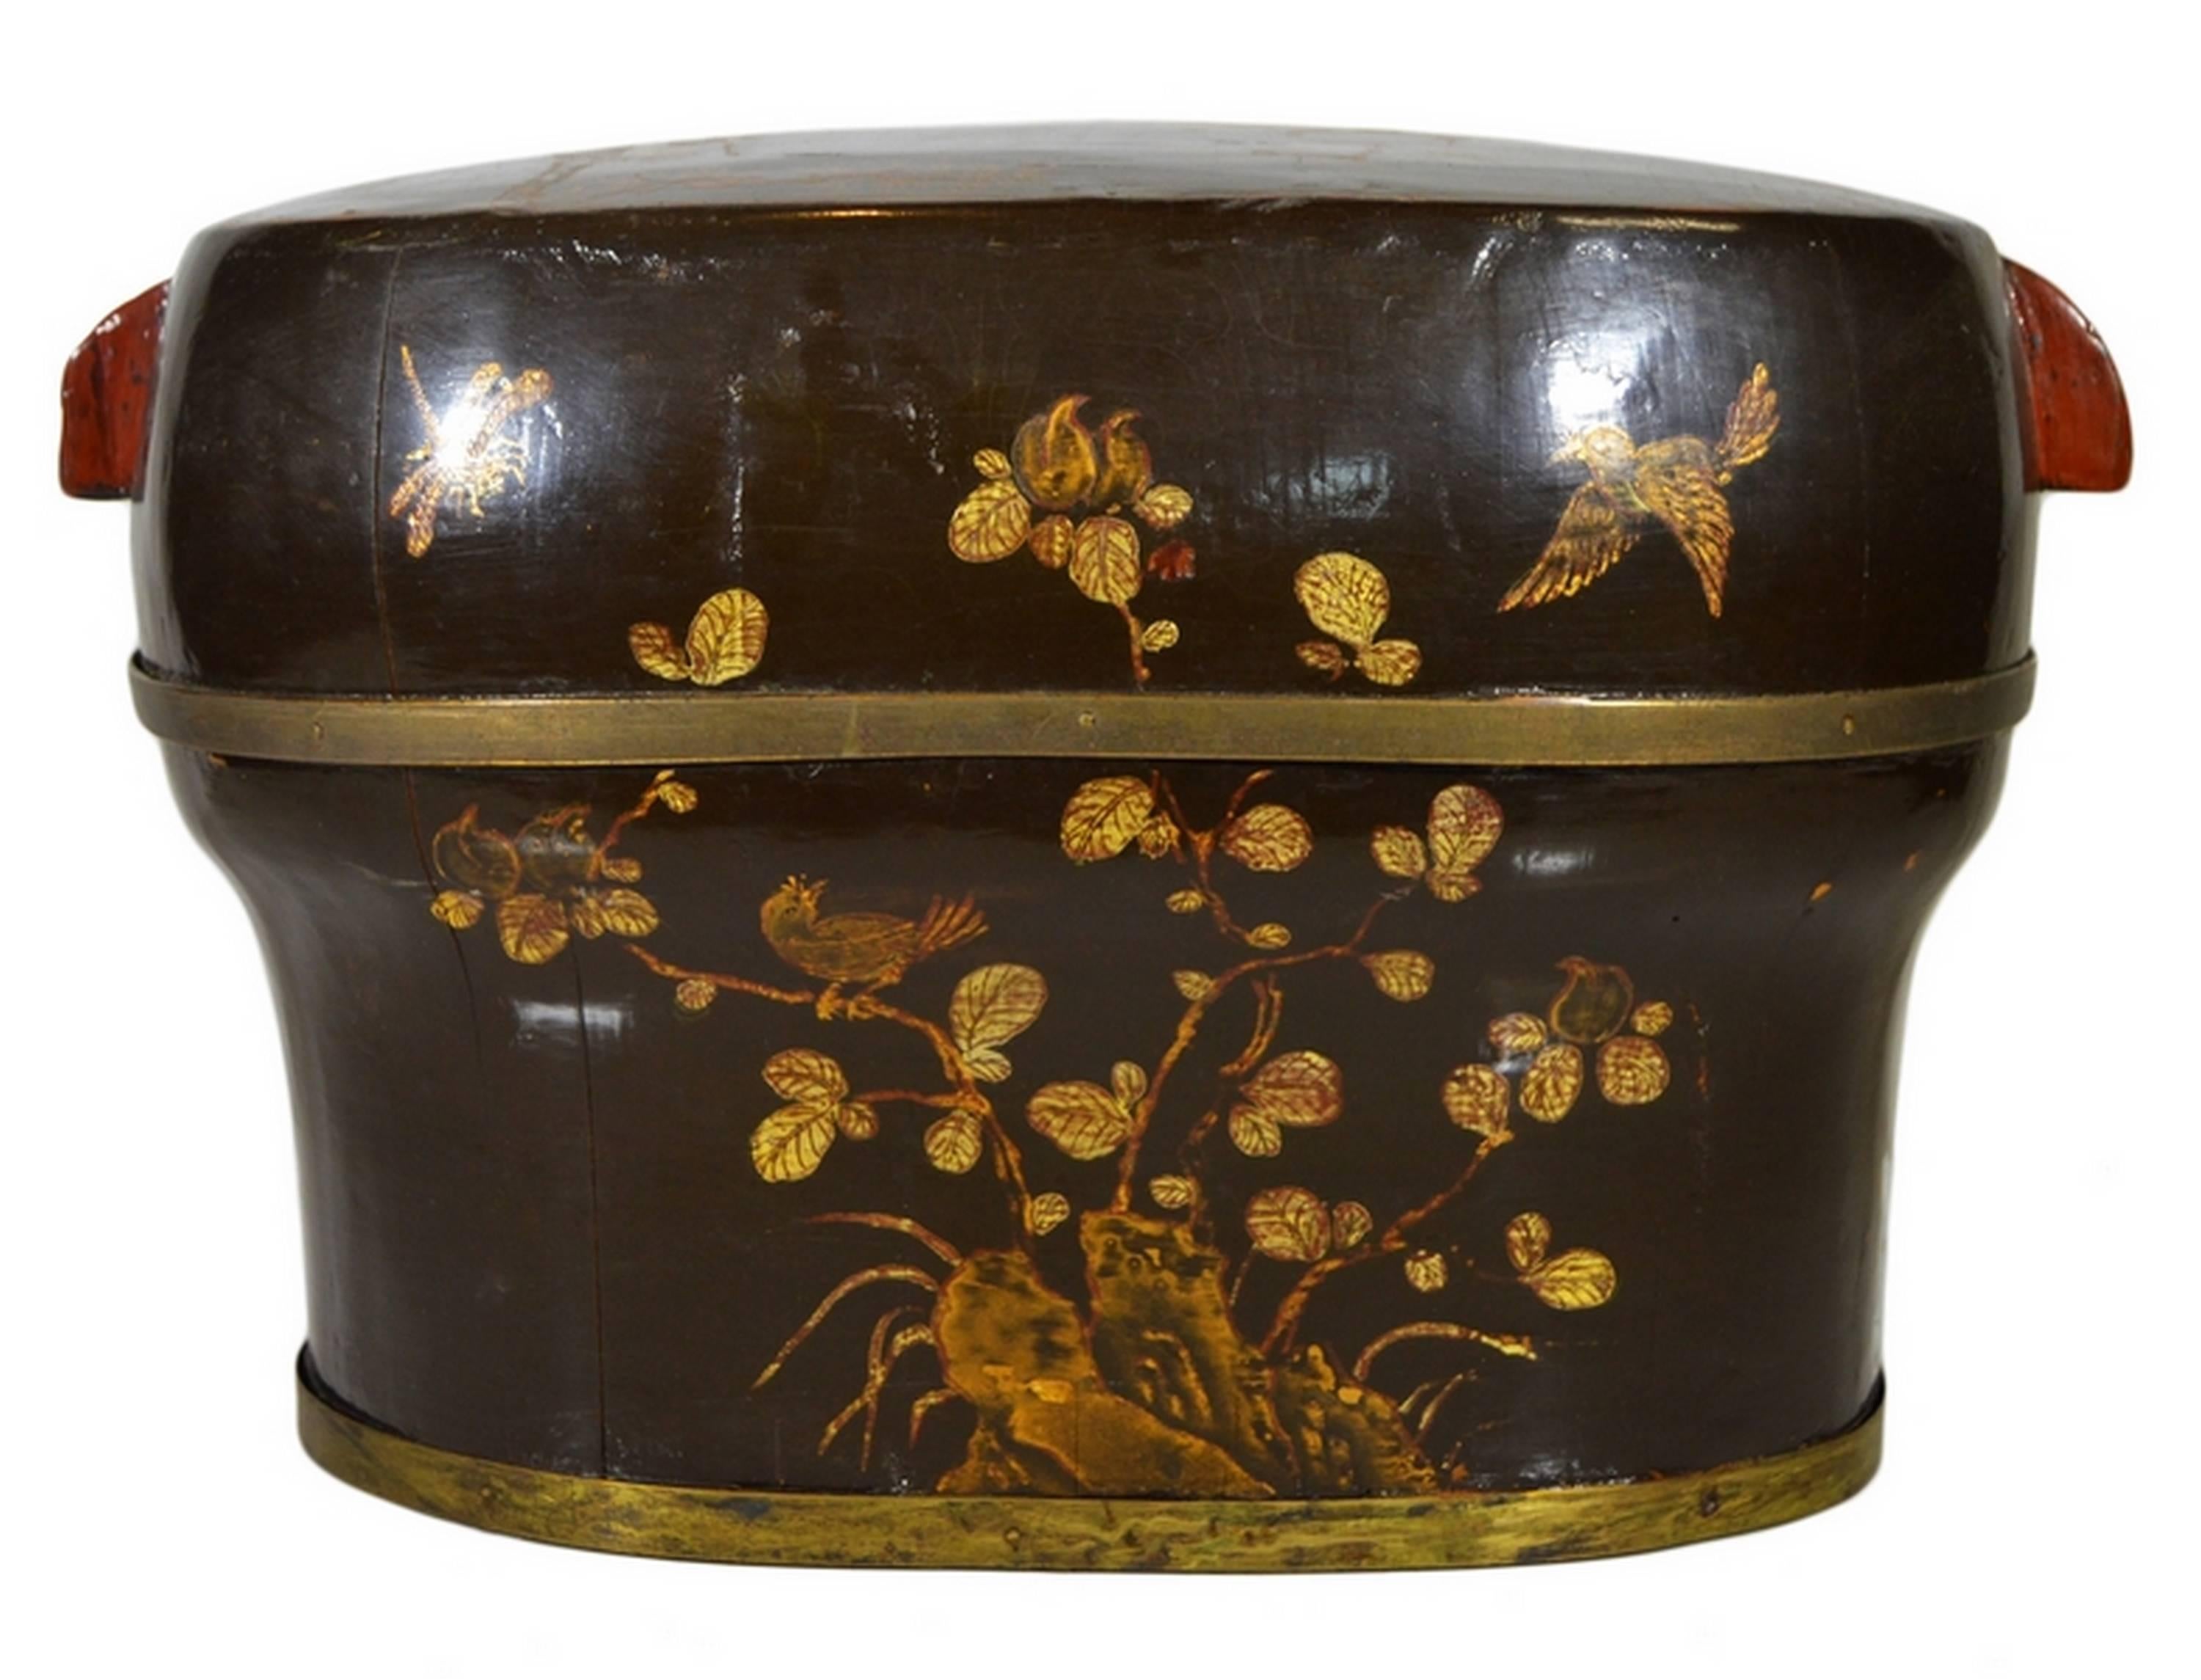 Chinese Hand-Painted and Lacquered Wedding Box with Flowers from, China, 19th Century